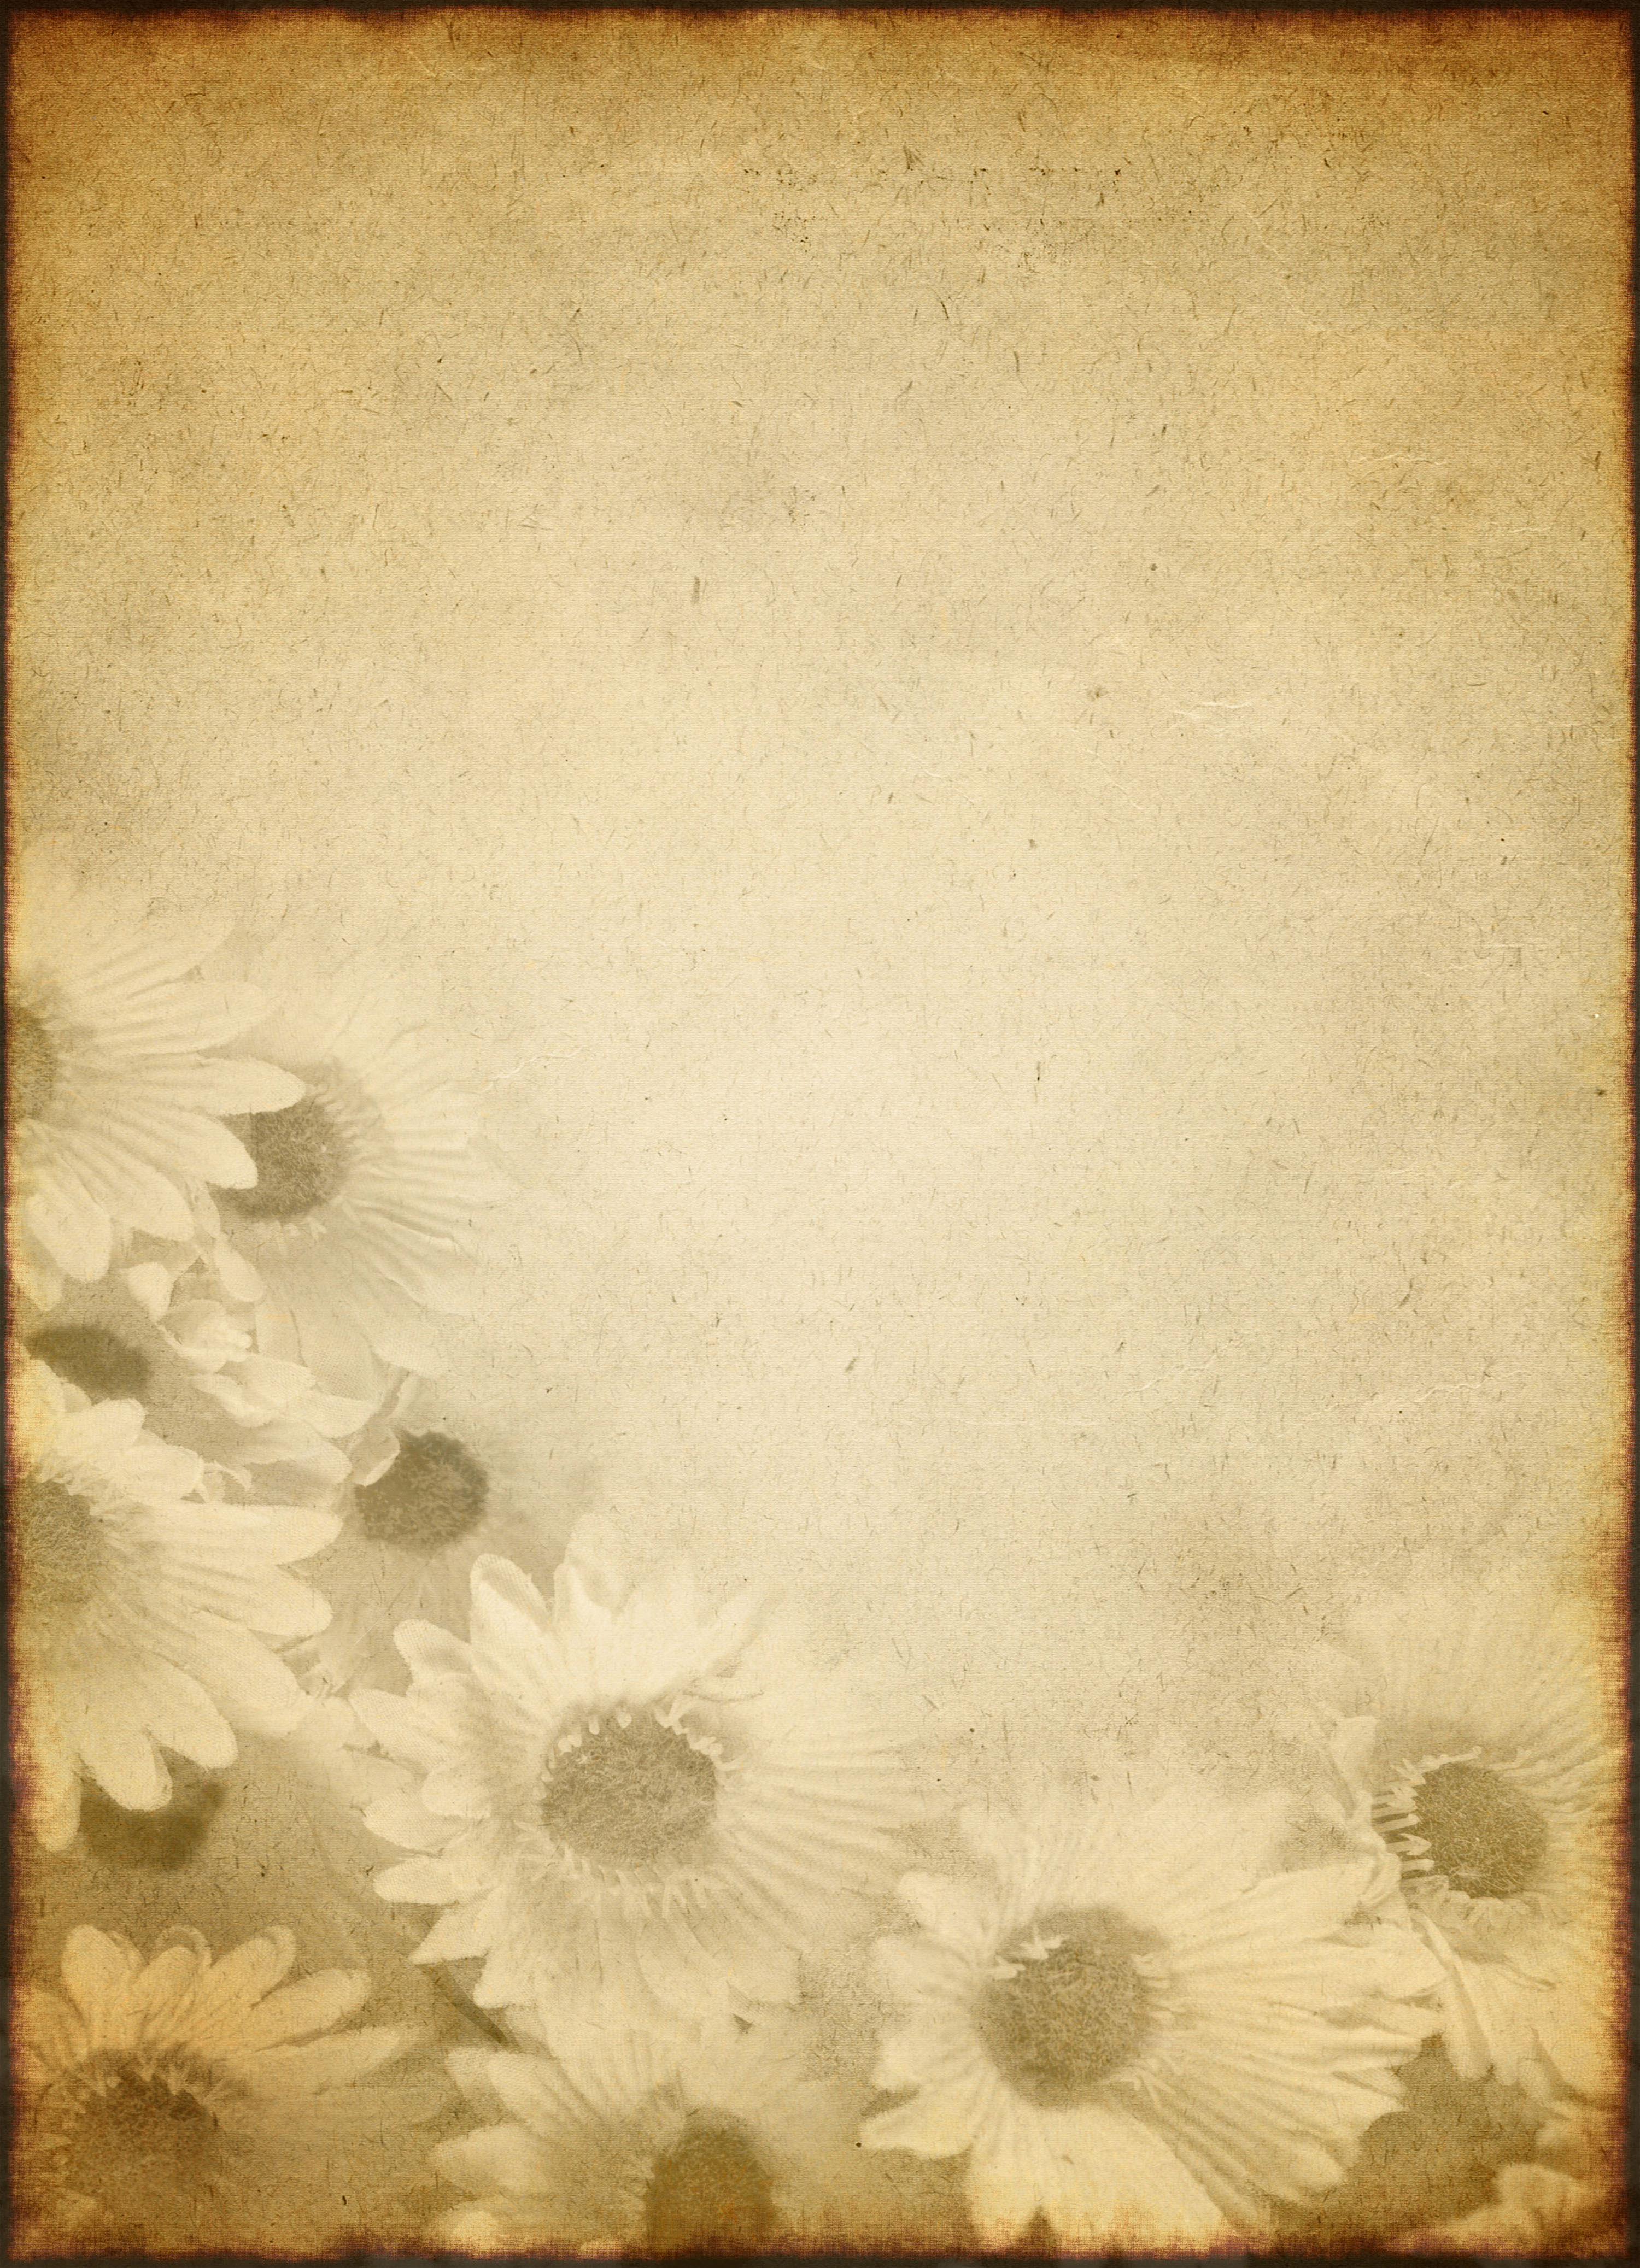 Old paper texture that is worn, faded and has floral print
